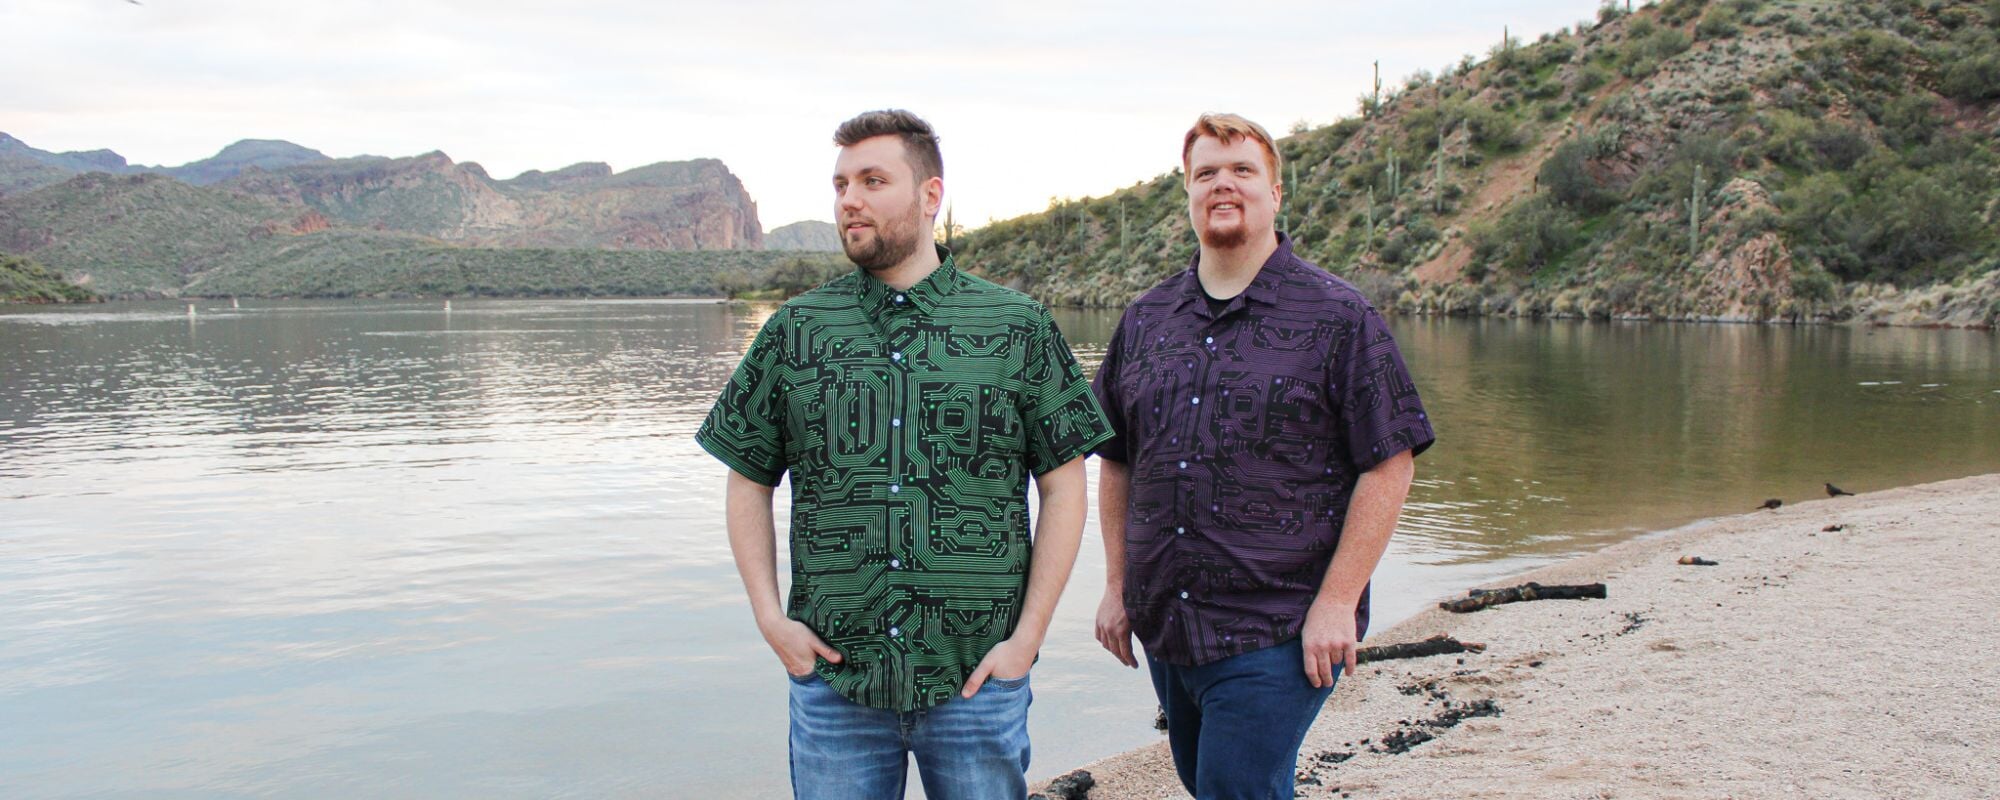 Two men wearing cool tropical button-up shirts with a unique print of computer circuit boards. These geeky shirts are perfect for men who love technology and want to show off their inner geek.